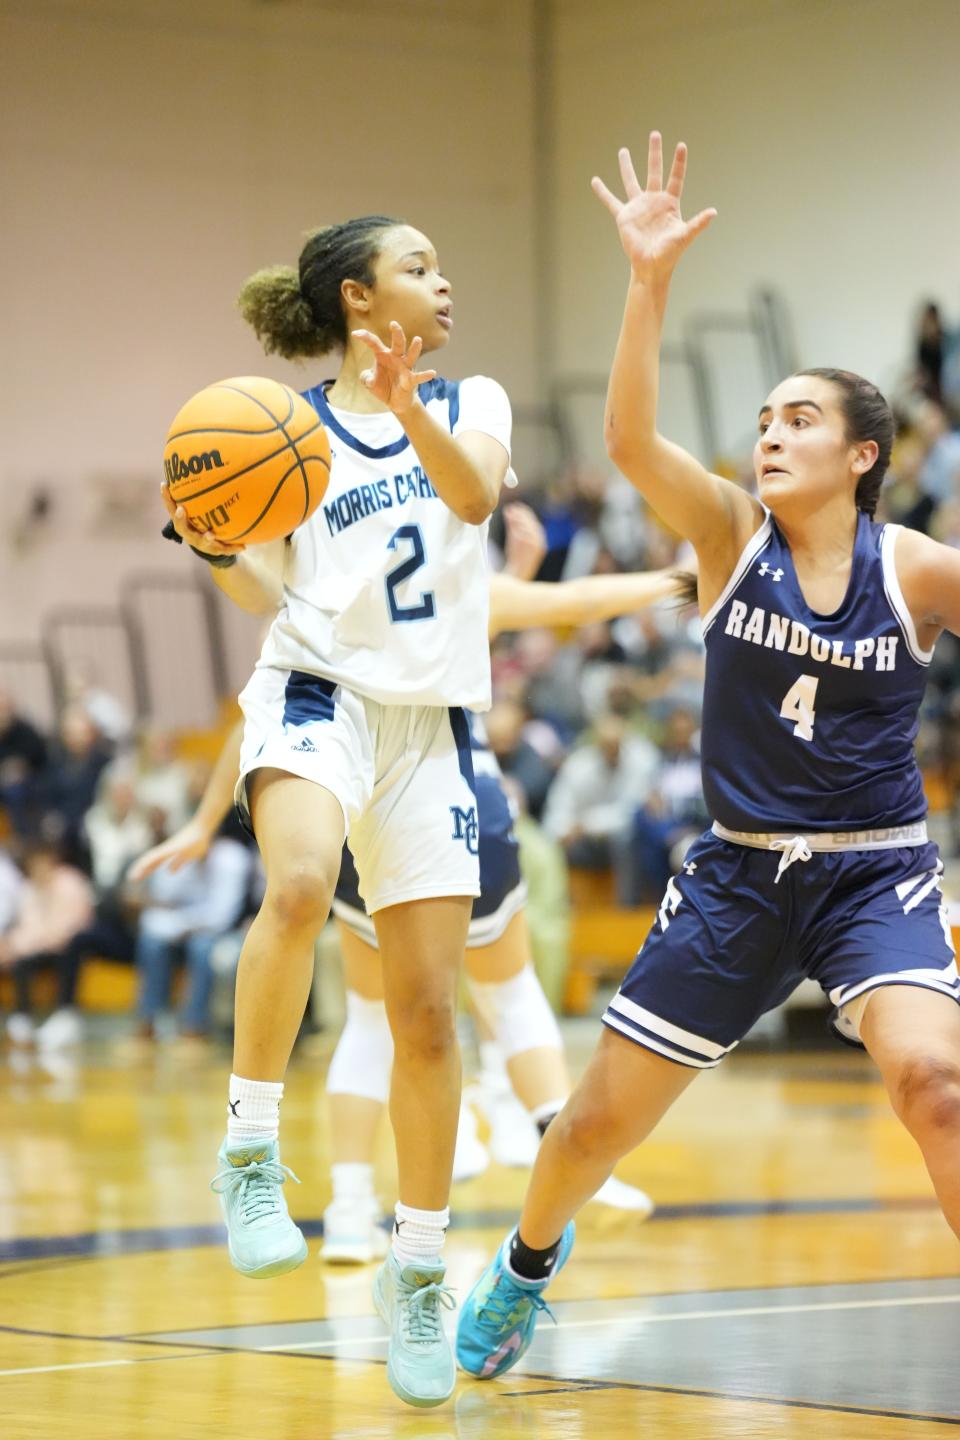 Morris Catholic vs. Randolph in the Morris County Tournament Girls Basketball Semifinals at the County College of Morris on Friday, February 10, 2023. MC #2 Mya Pauldo tries to get past R #4 Aliyah Lambo. 